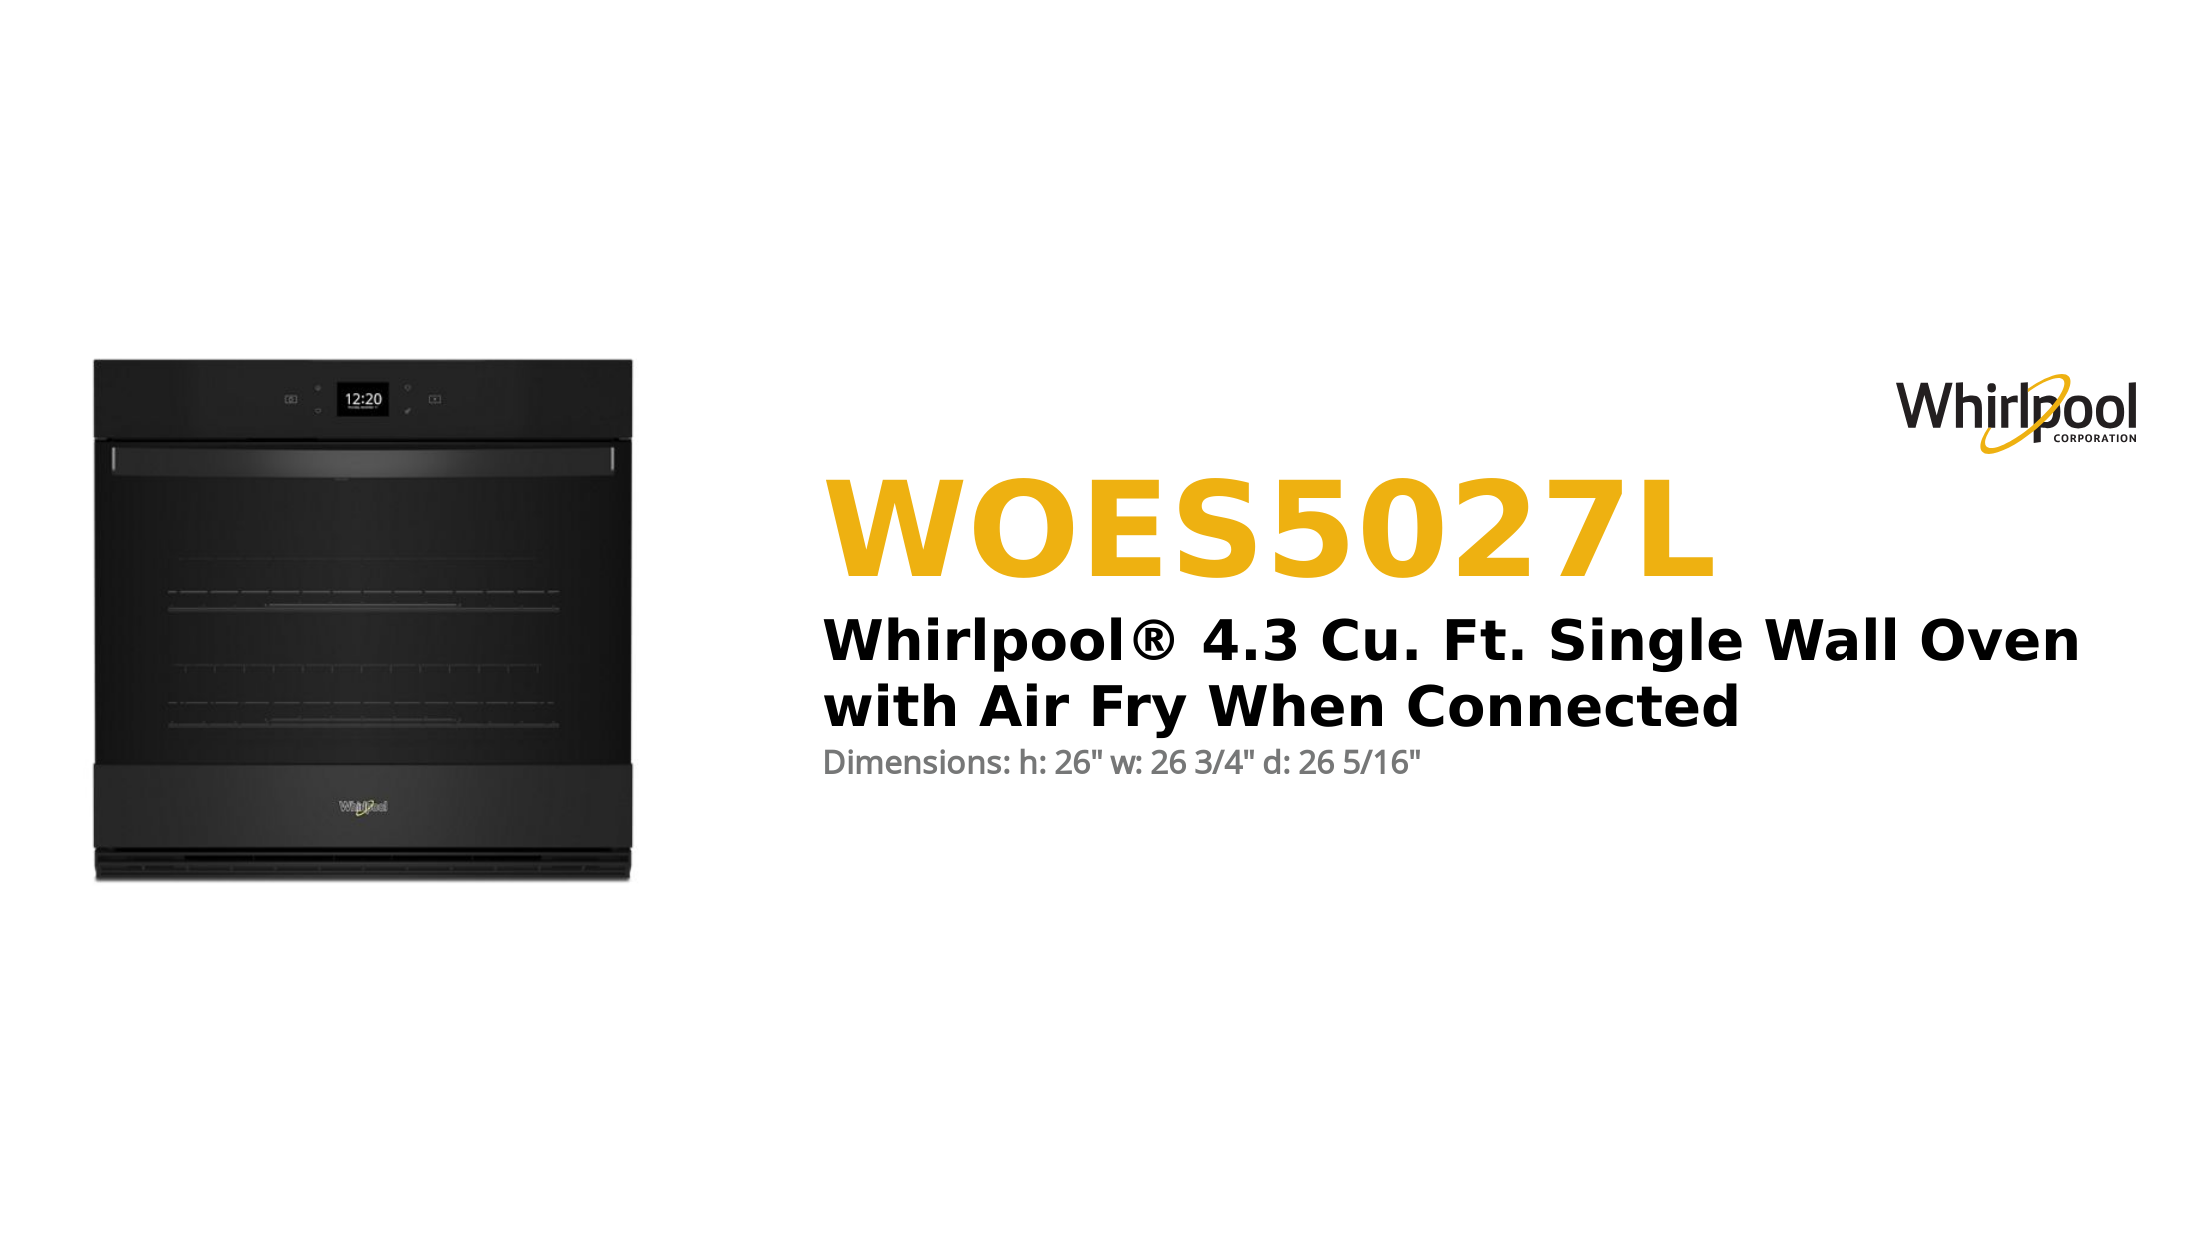 



WHIRLPOOL® 4.3 CU. FT. SINGLE WALL OVEN WITH AIR FRY WHEN CONNECTED



